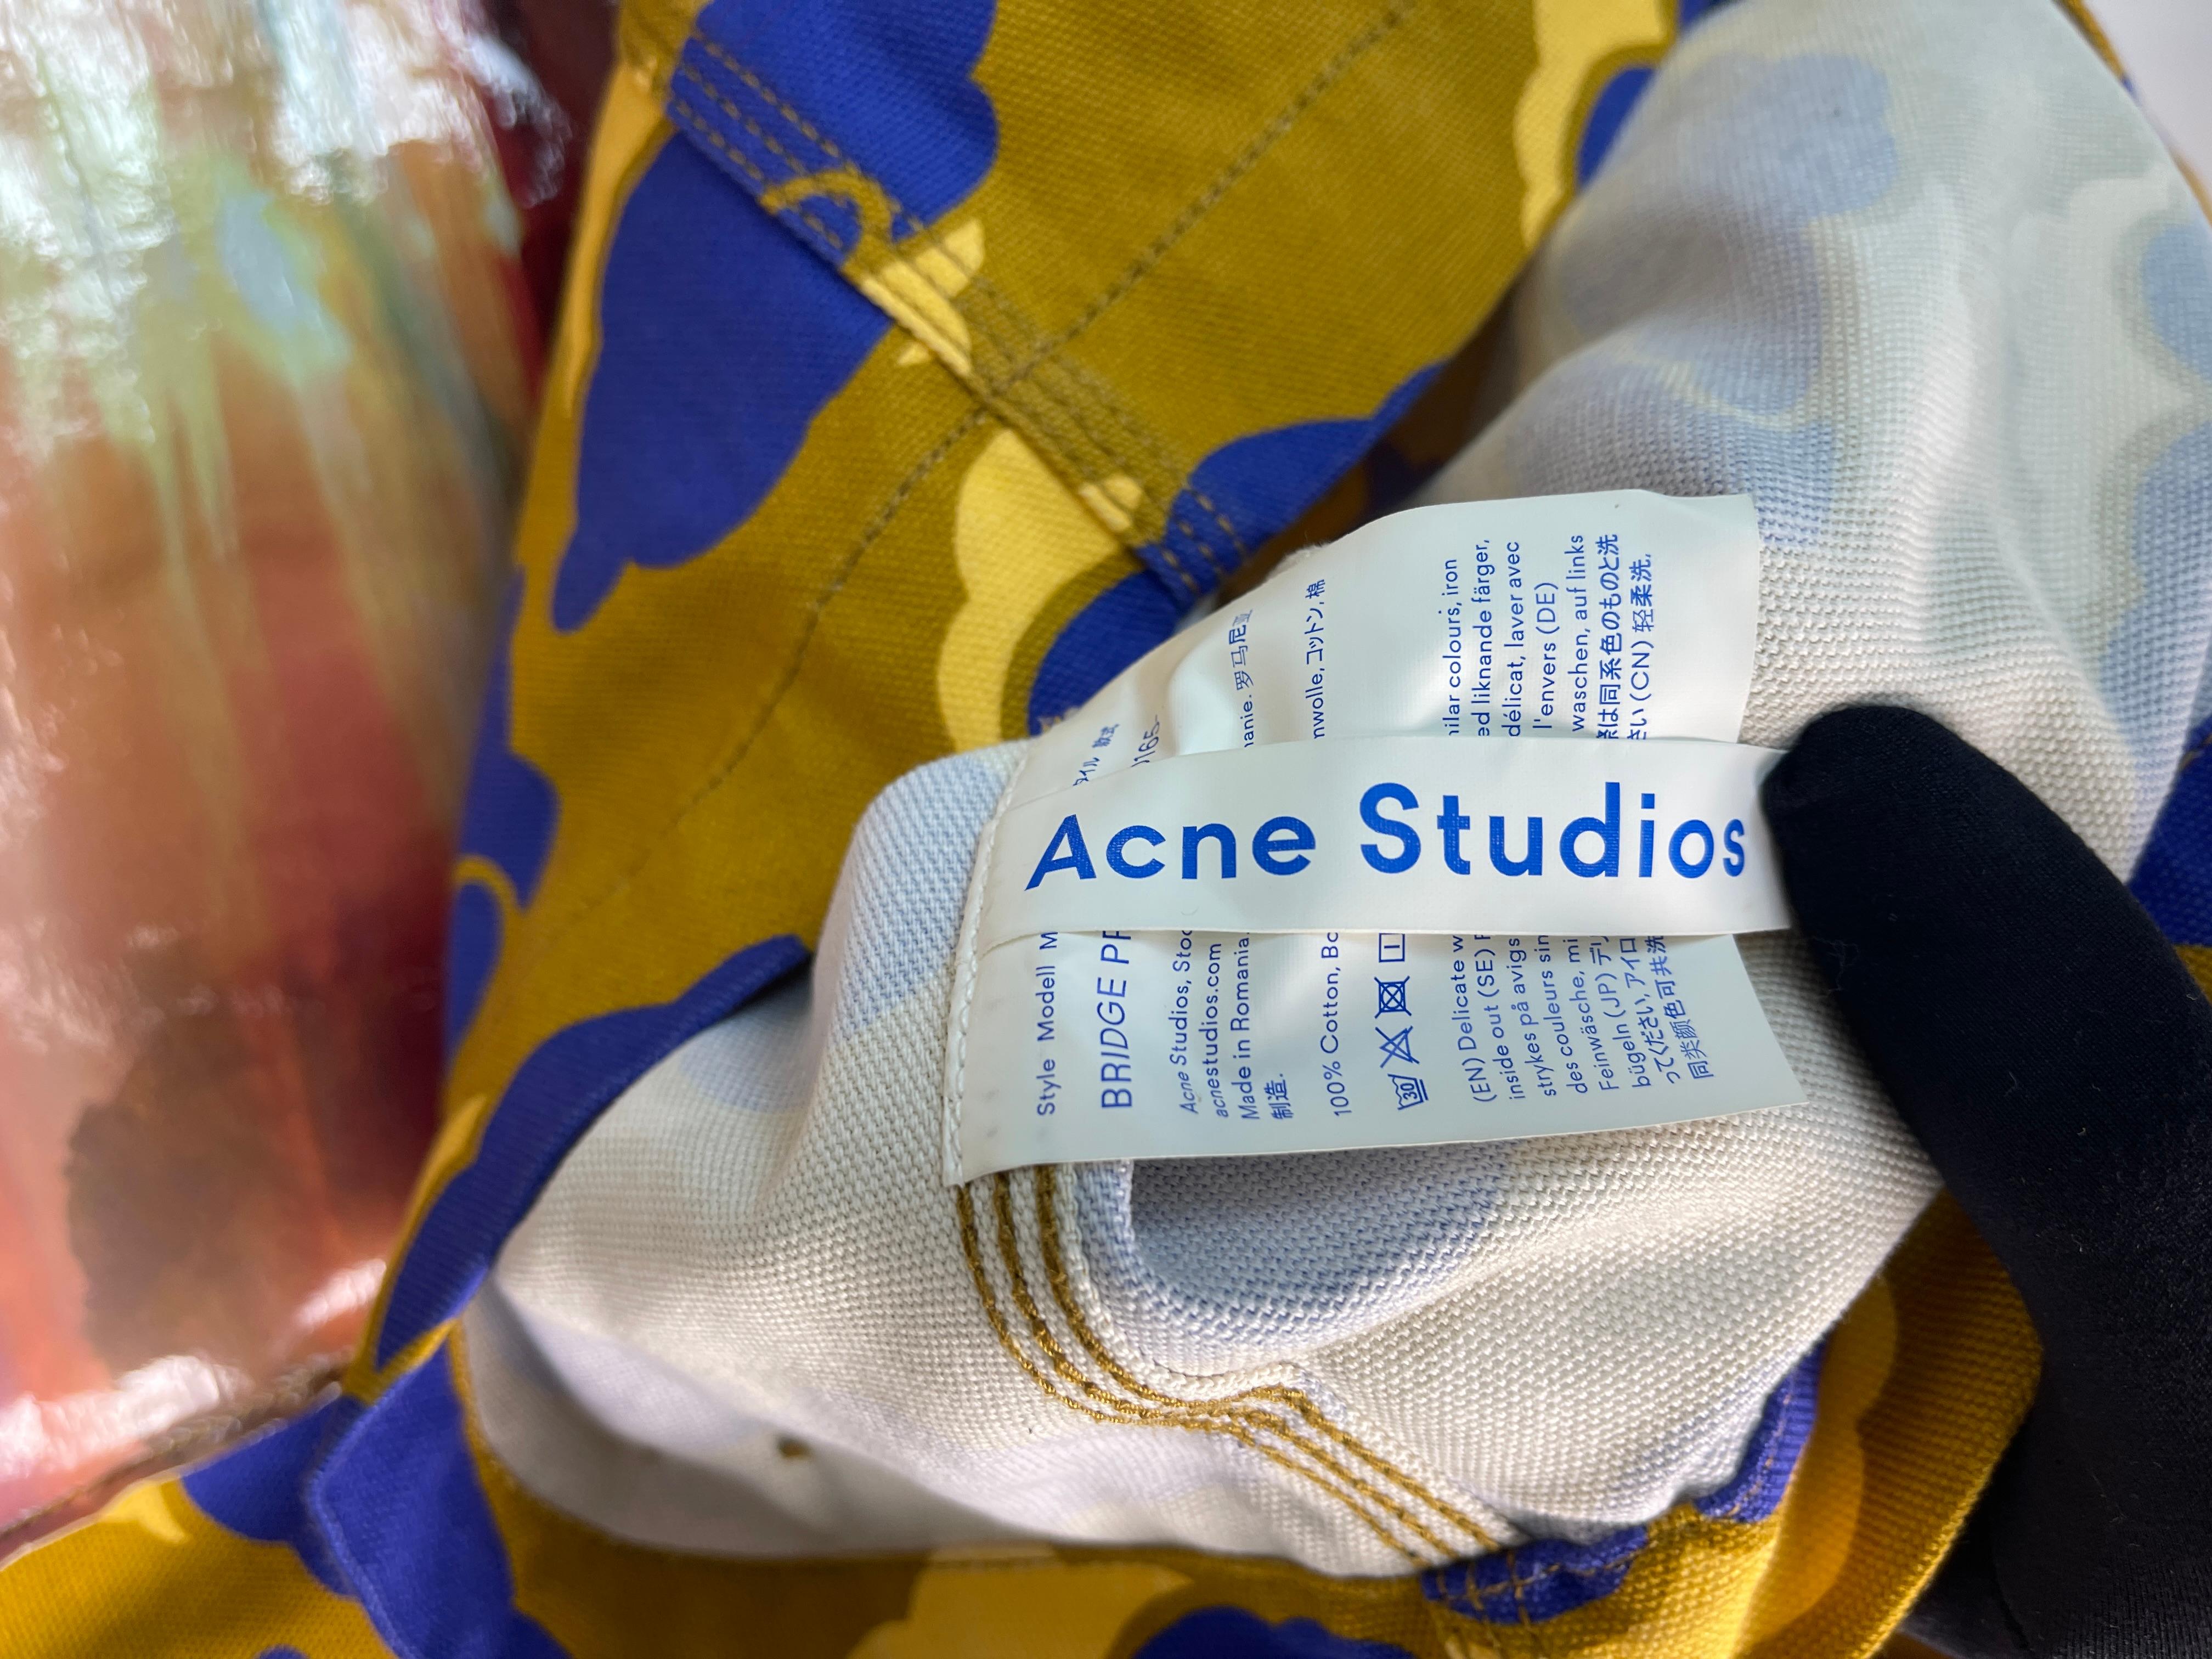 Acne Studios Landscape Painting Light Jacket In Excellent Condition For Sale In Tương Mai Ward, Hoang Mai District